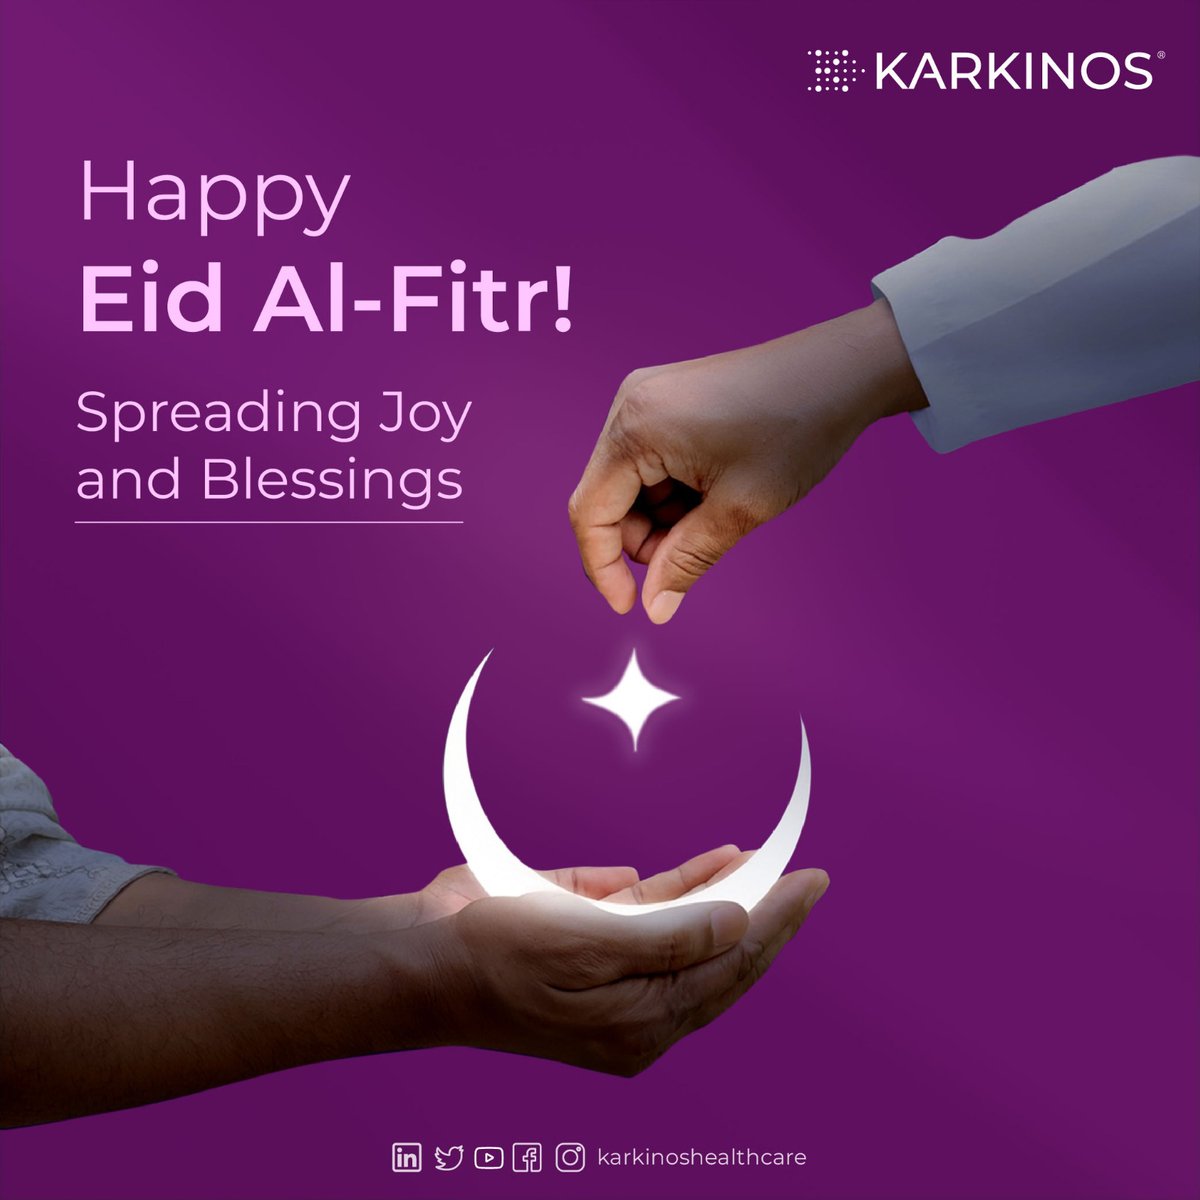 Eid Mubarak from Karkinos Healthcare. Wishing you a blessed celebration filled with health, happiness, and harmony. #EidMubarak #HealthAndHappiness